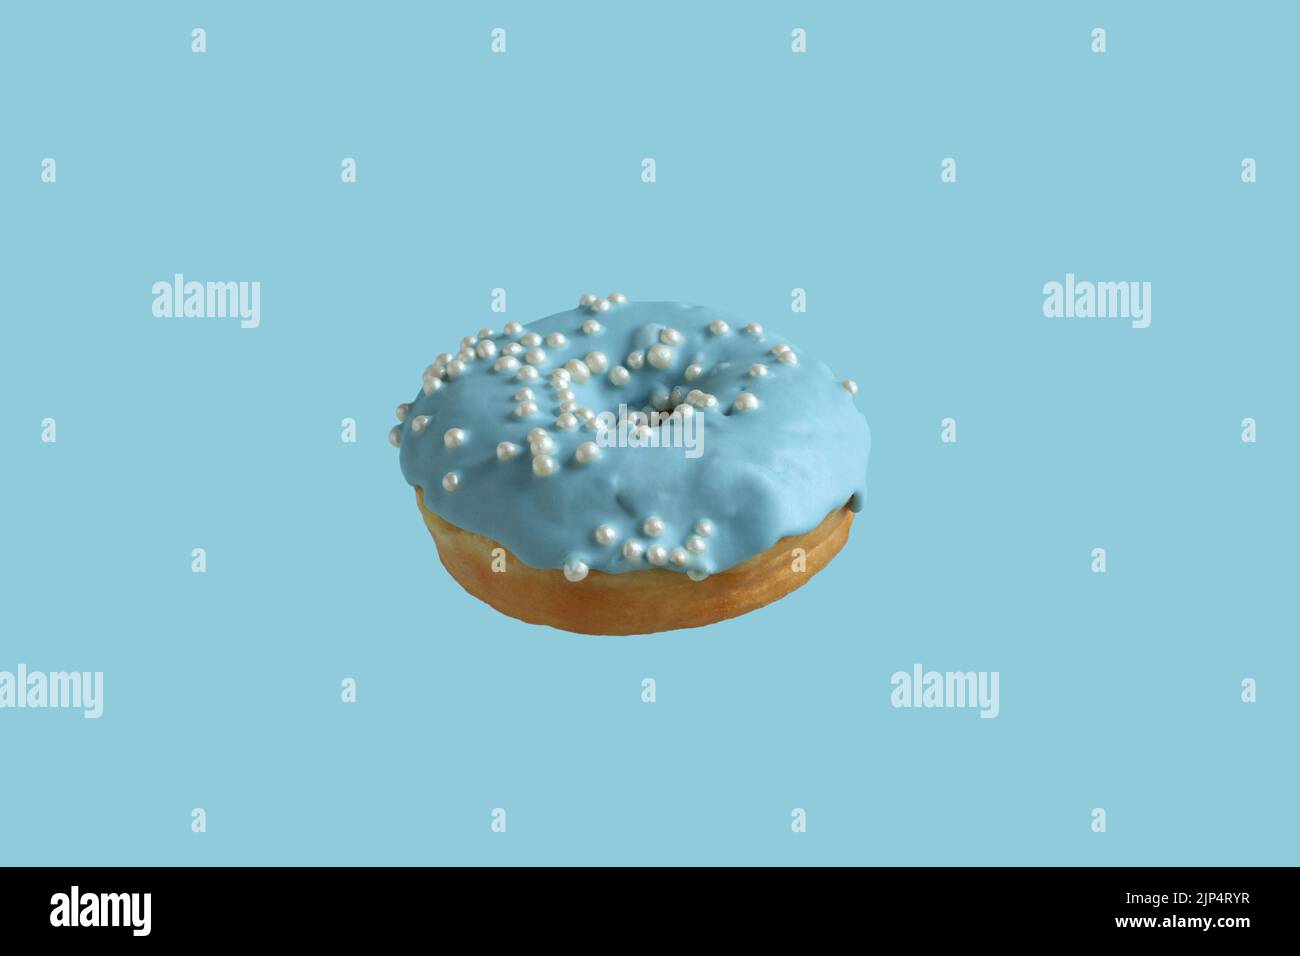 Donuts covered with pale blue icing and sprinkled with pearl sugar beads on a light blue background. Closeup. Stock Photo